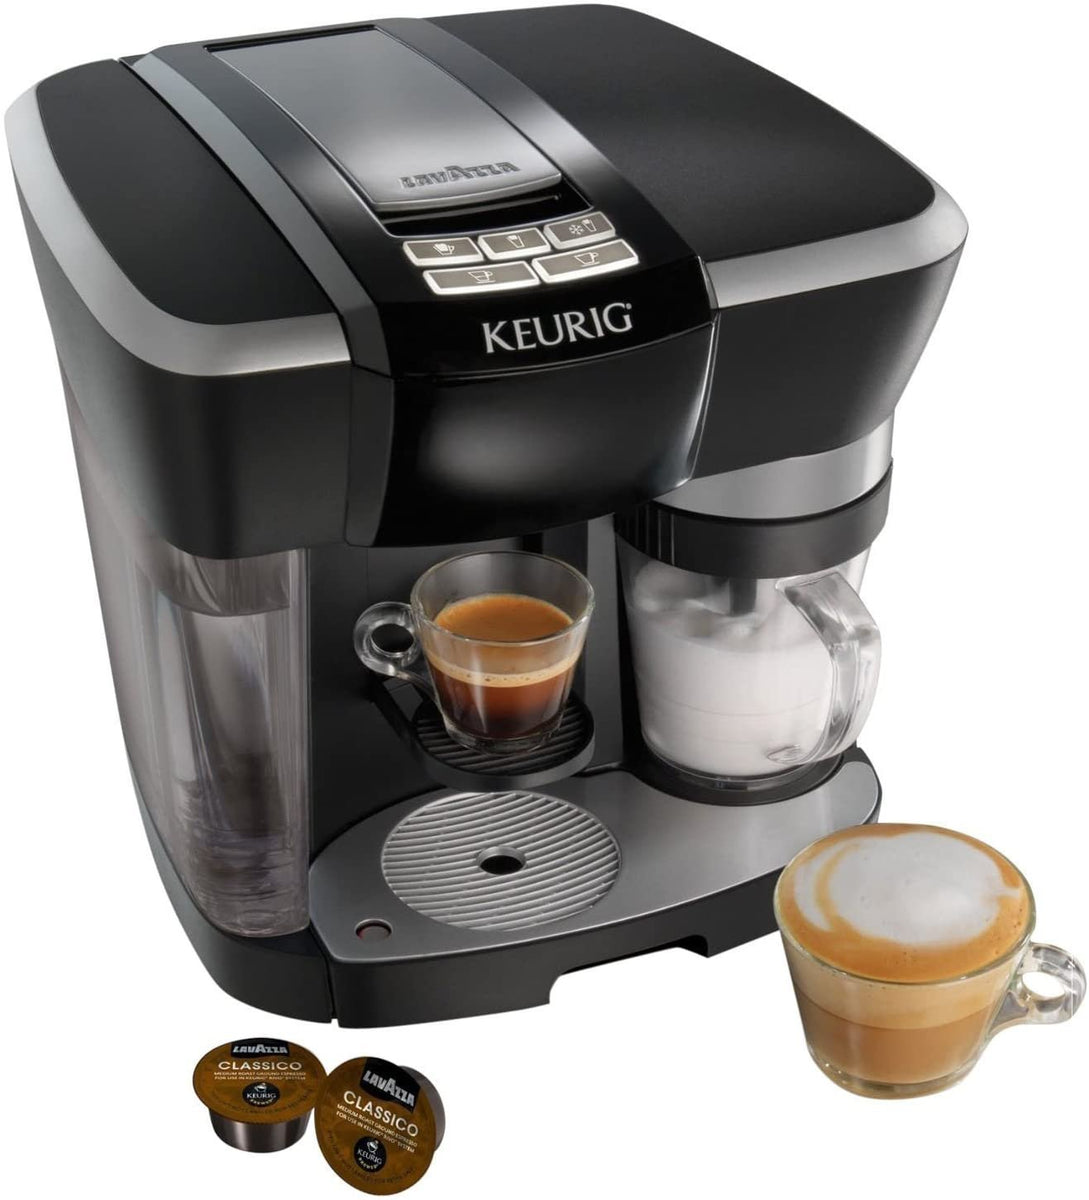 The Keurig Rivo Cappuccino and Latte System – CharmBin